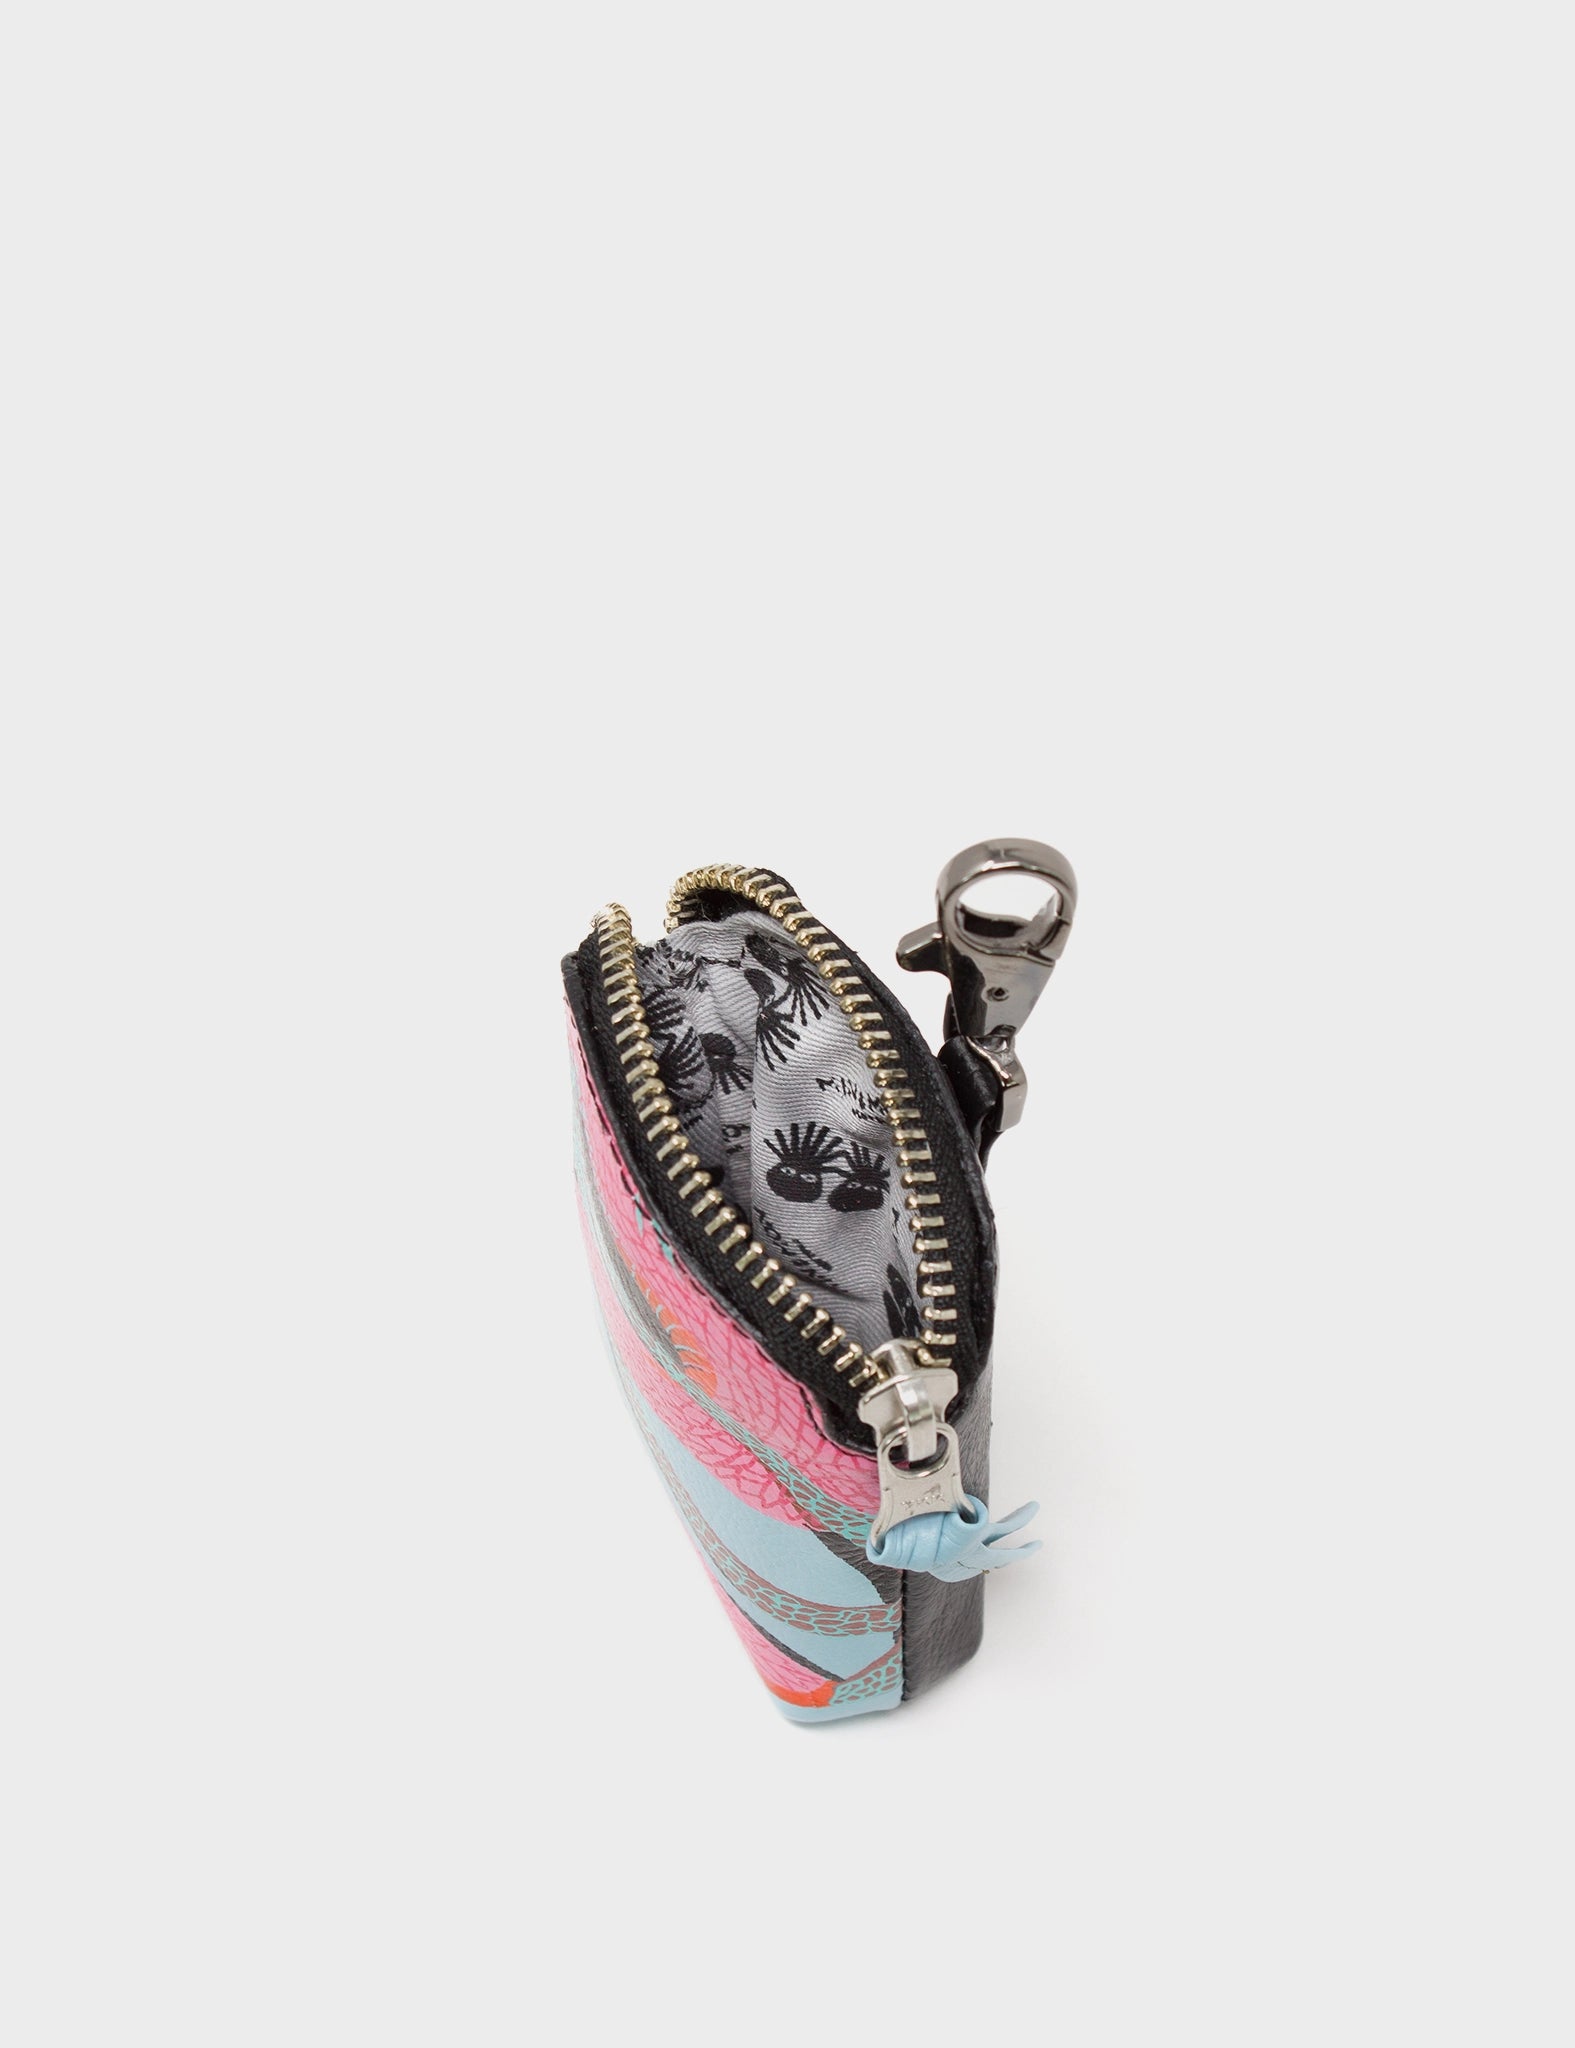 Pouch Charm - Stratosphere Blue Leather Keychain Tiger and Snake Print - Inside